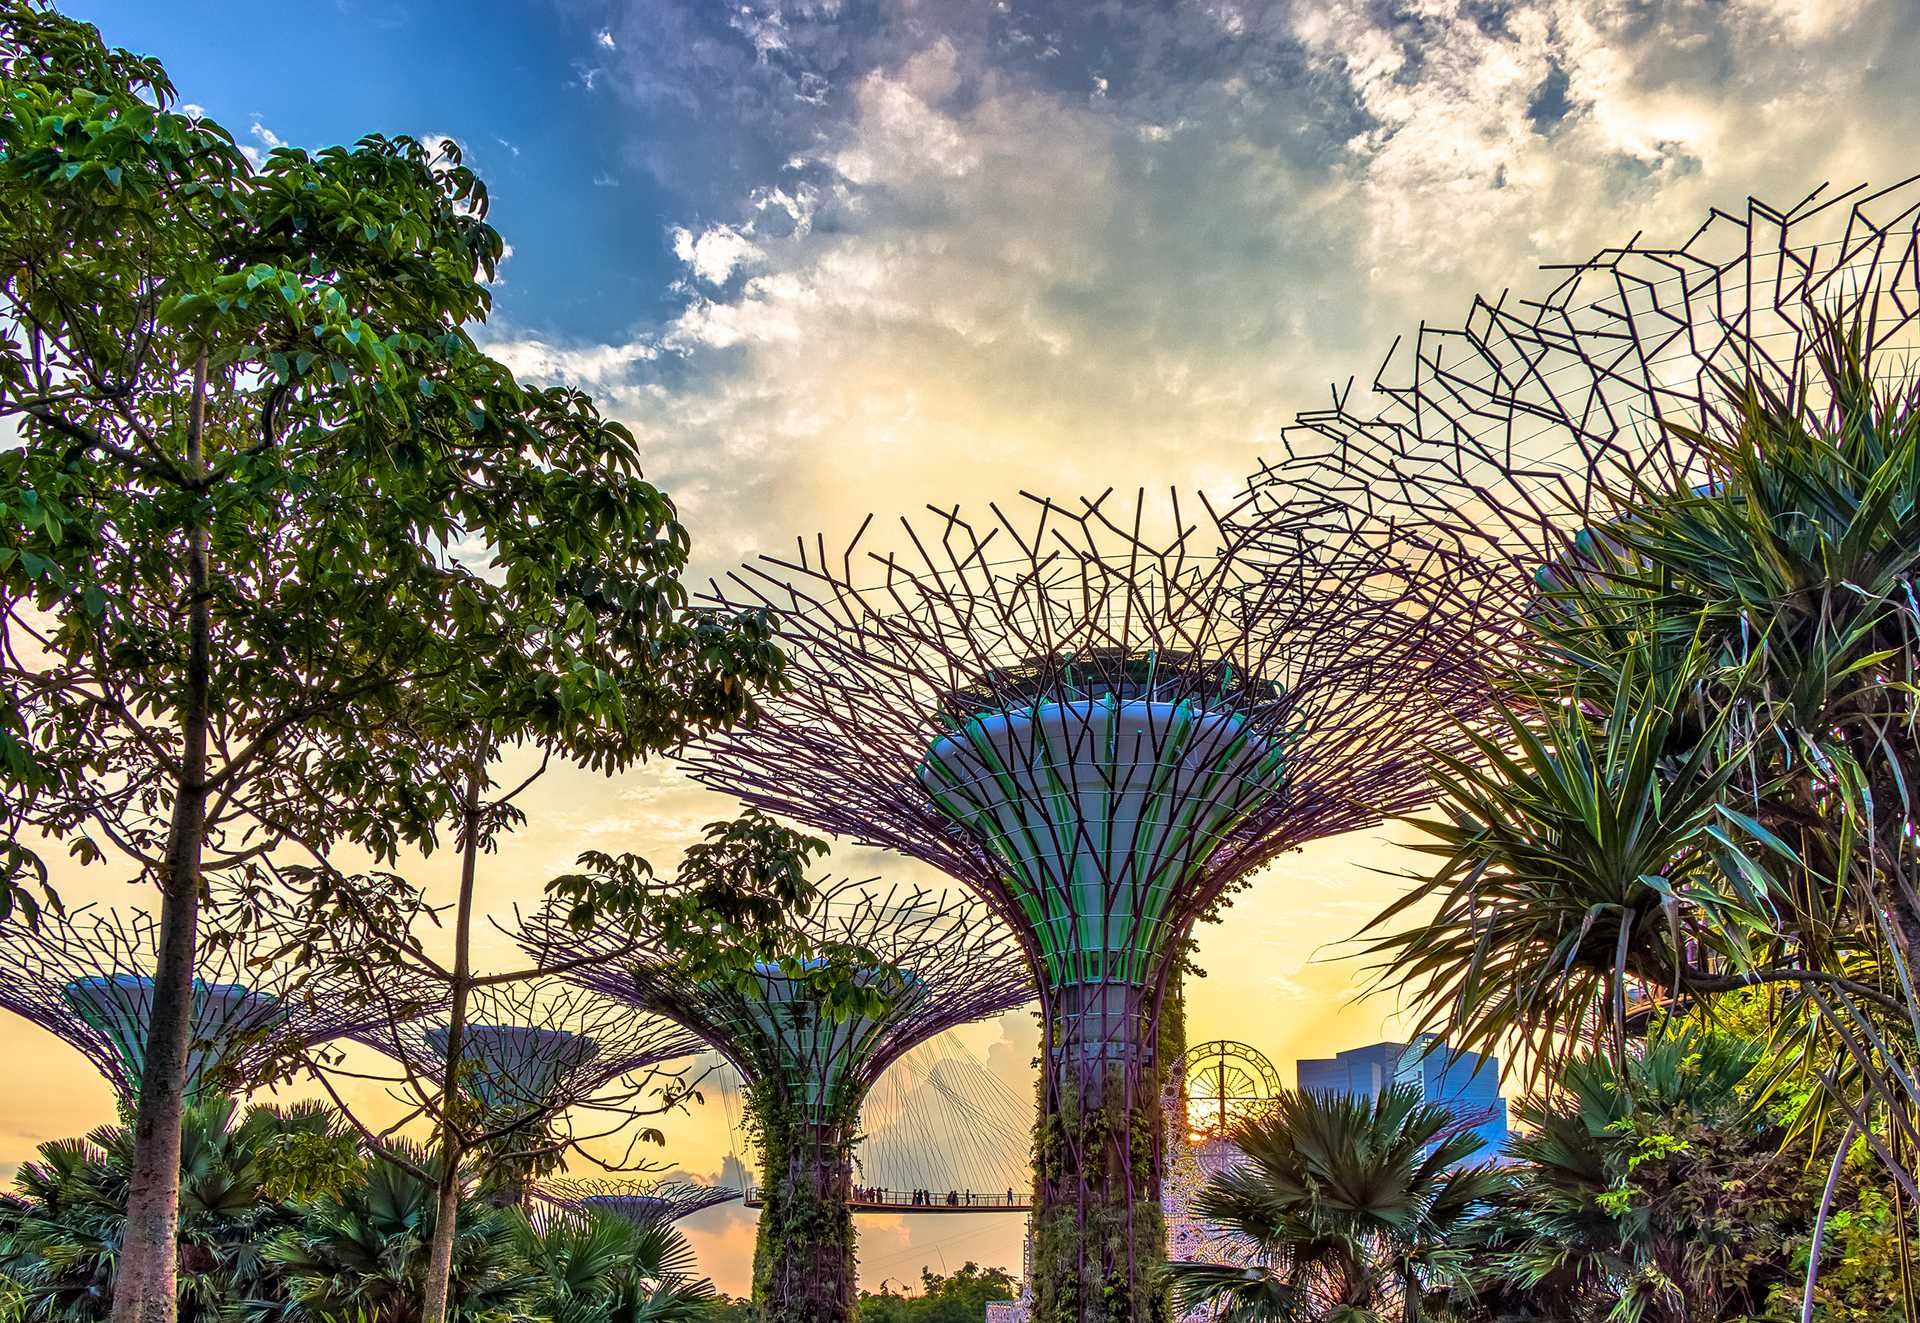 Singapore Premium Getaway for Two: 2 Adults 2 Nights